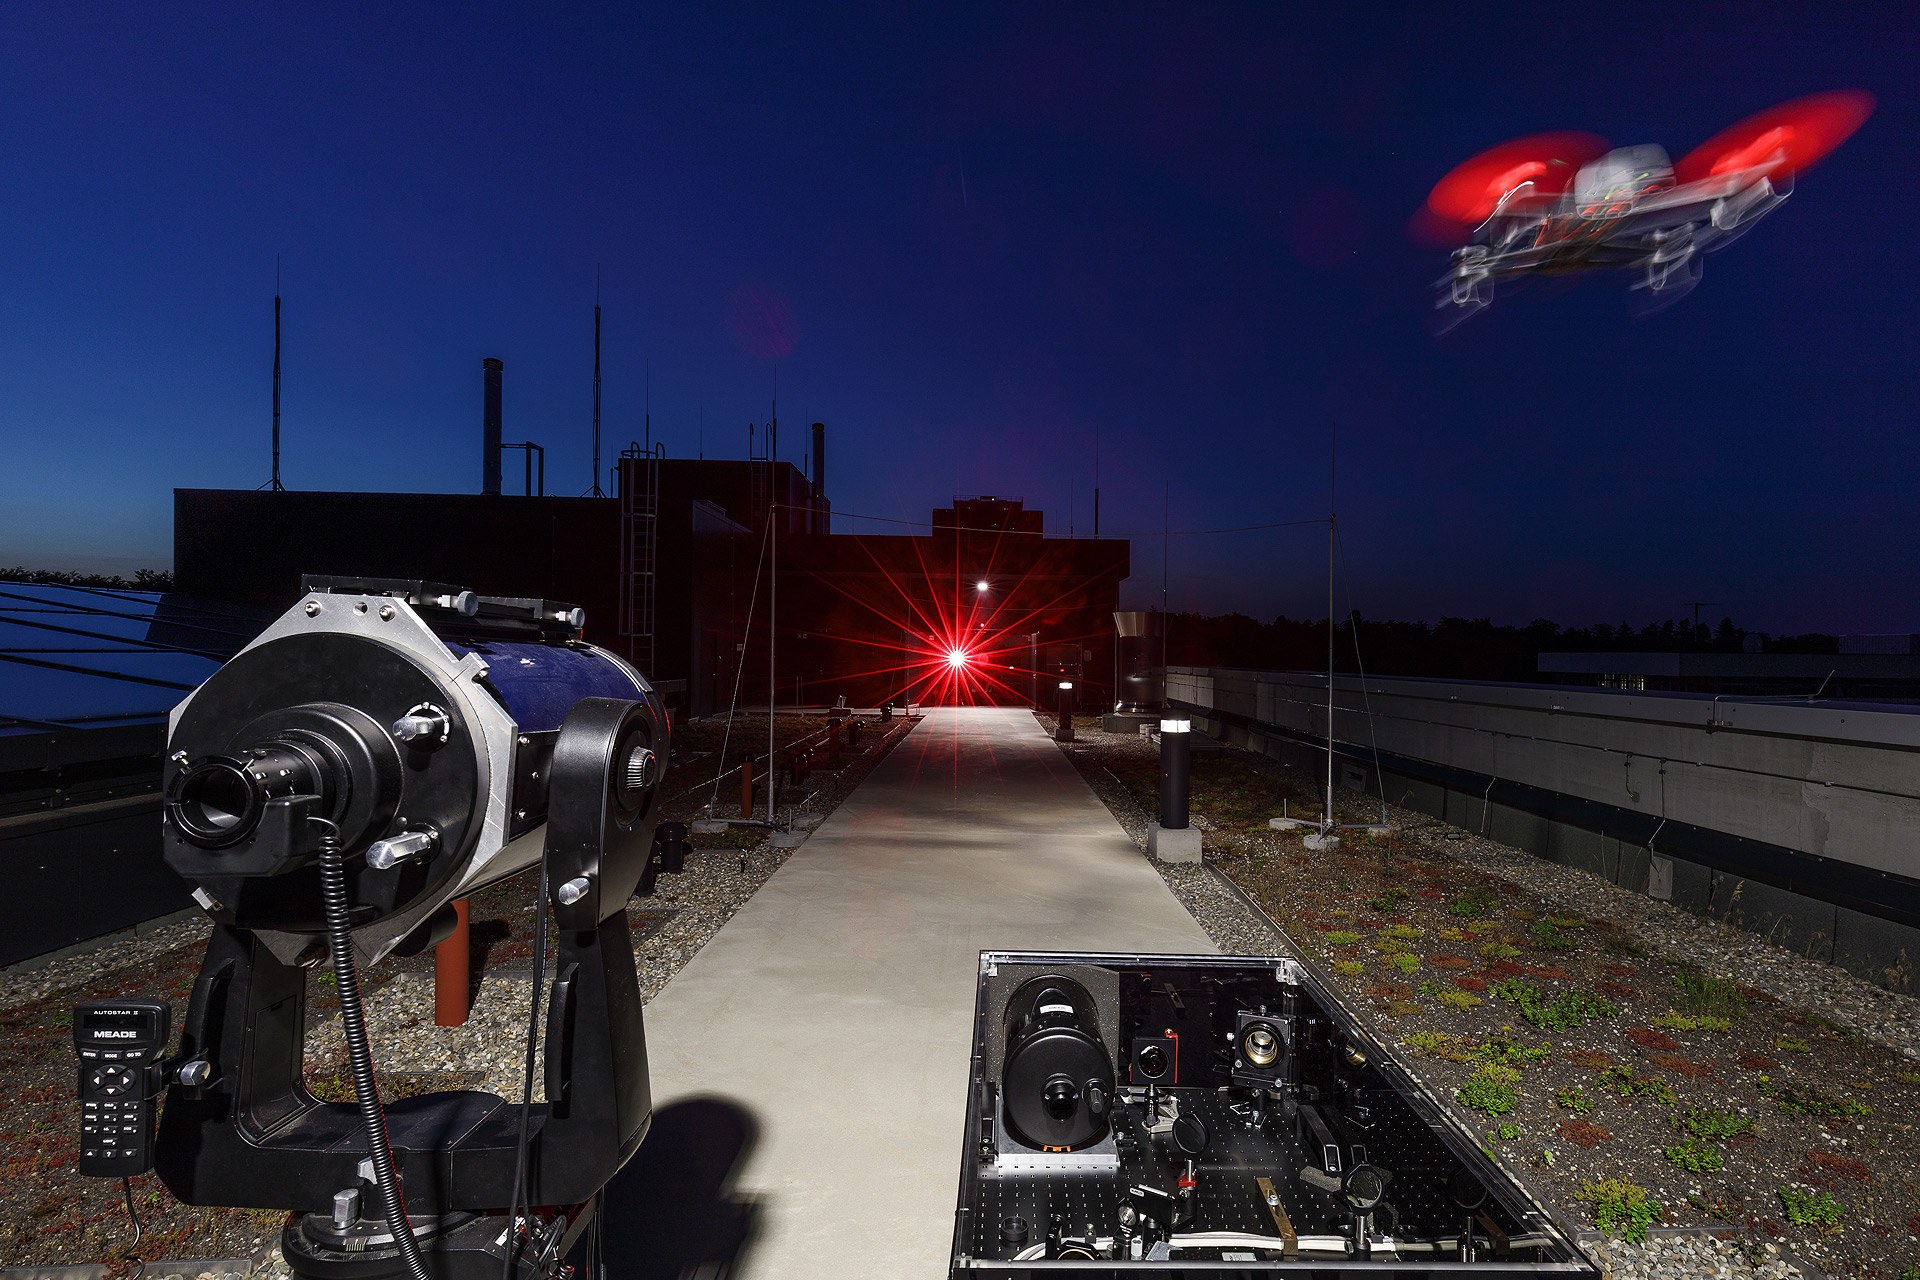 Test facility for tracking unmanned aerial vehicles using laser